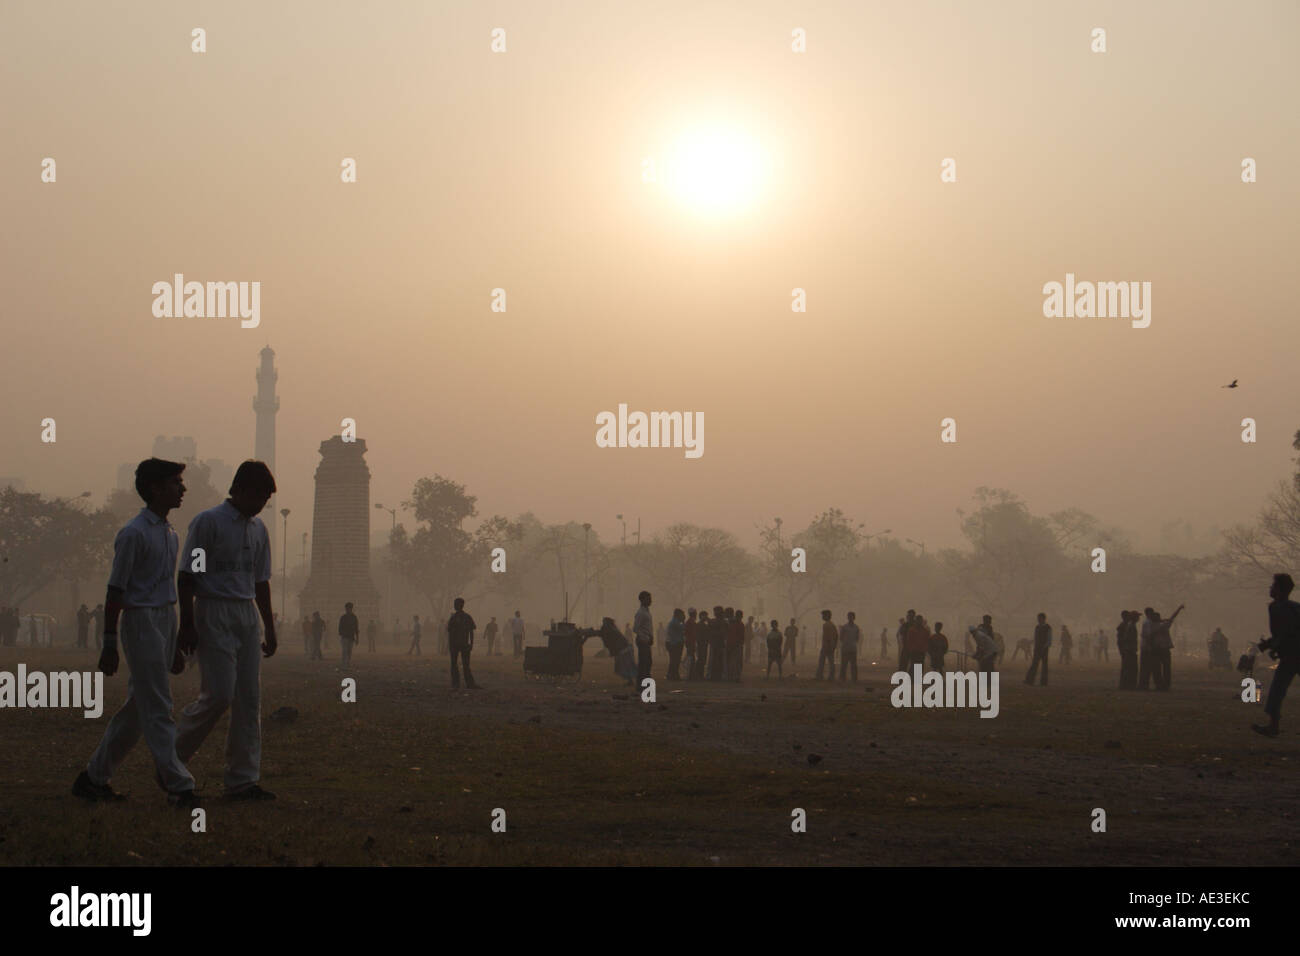 Young cricketers prepare for practice at dawn in India Stock Photo